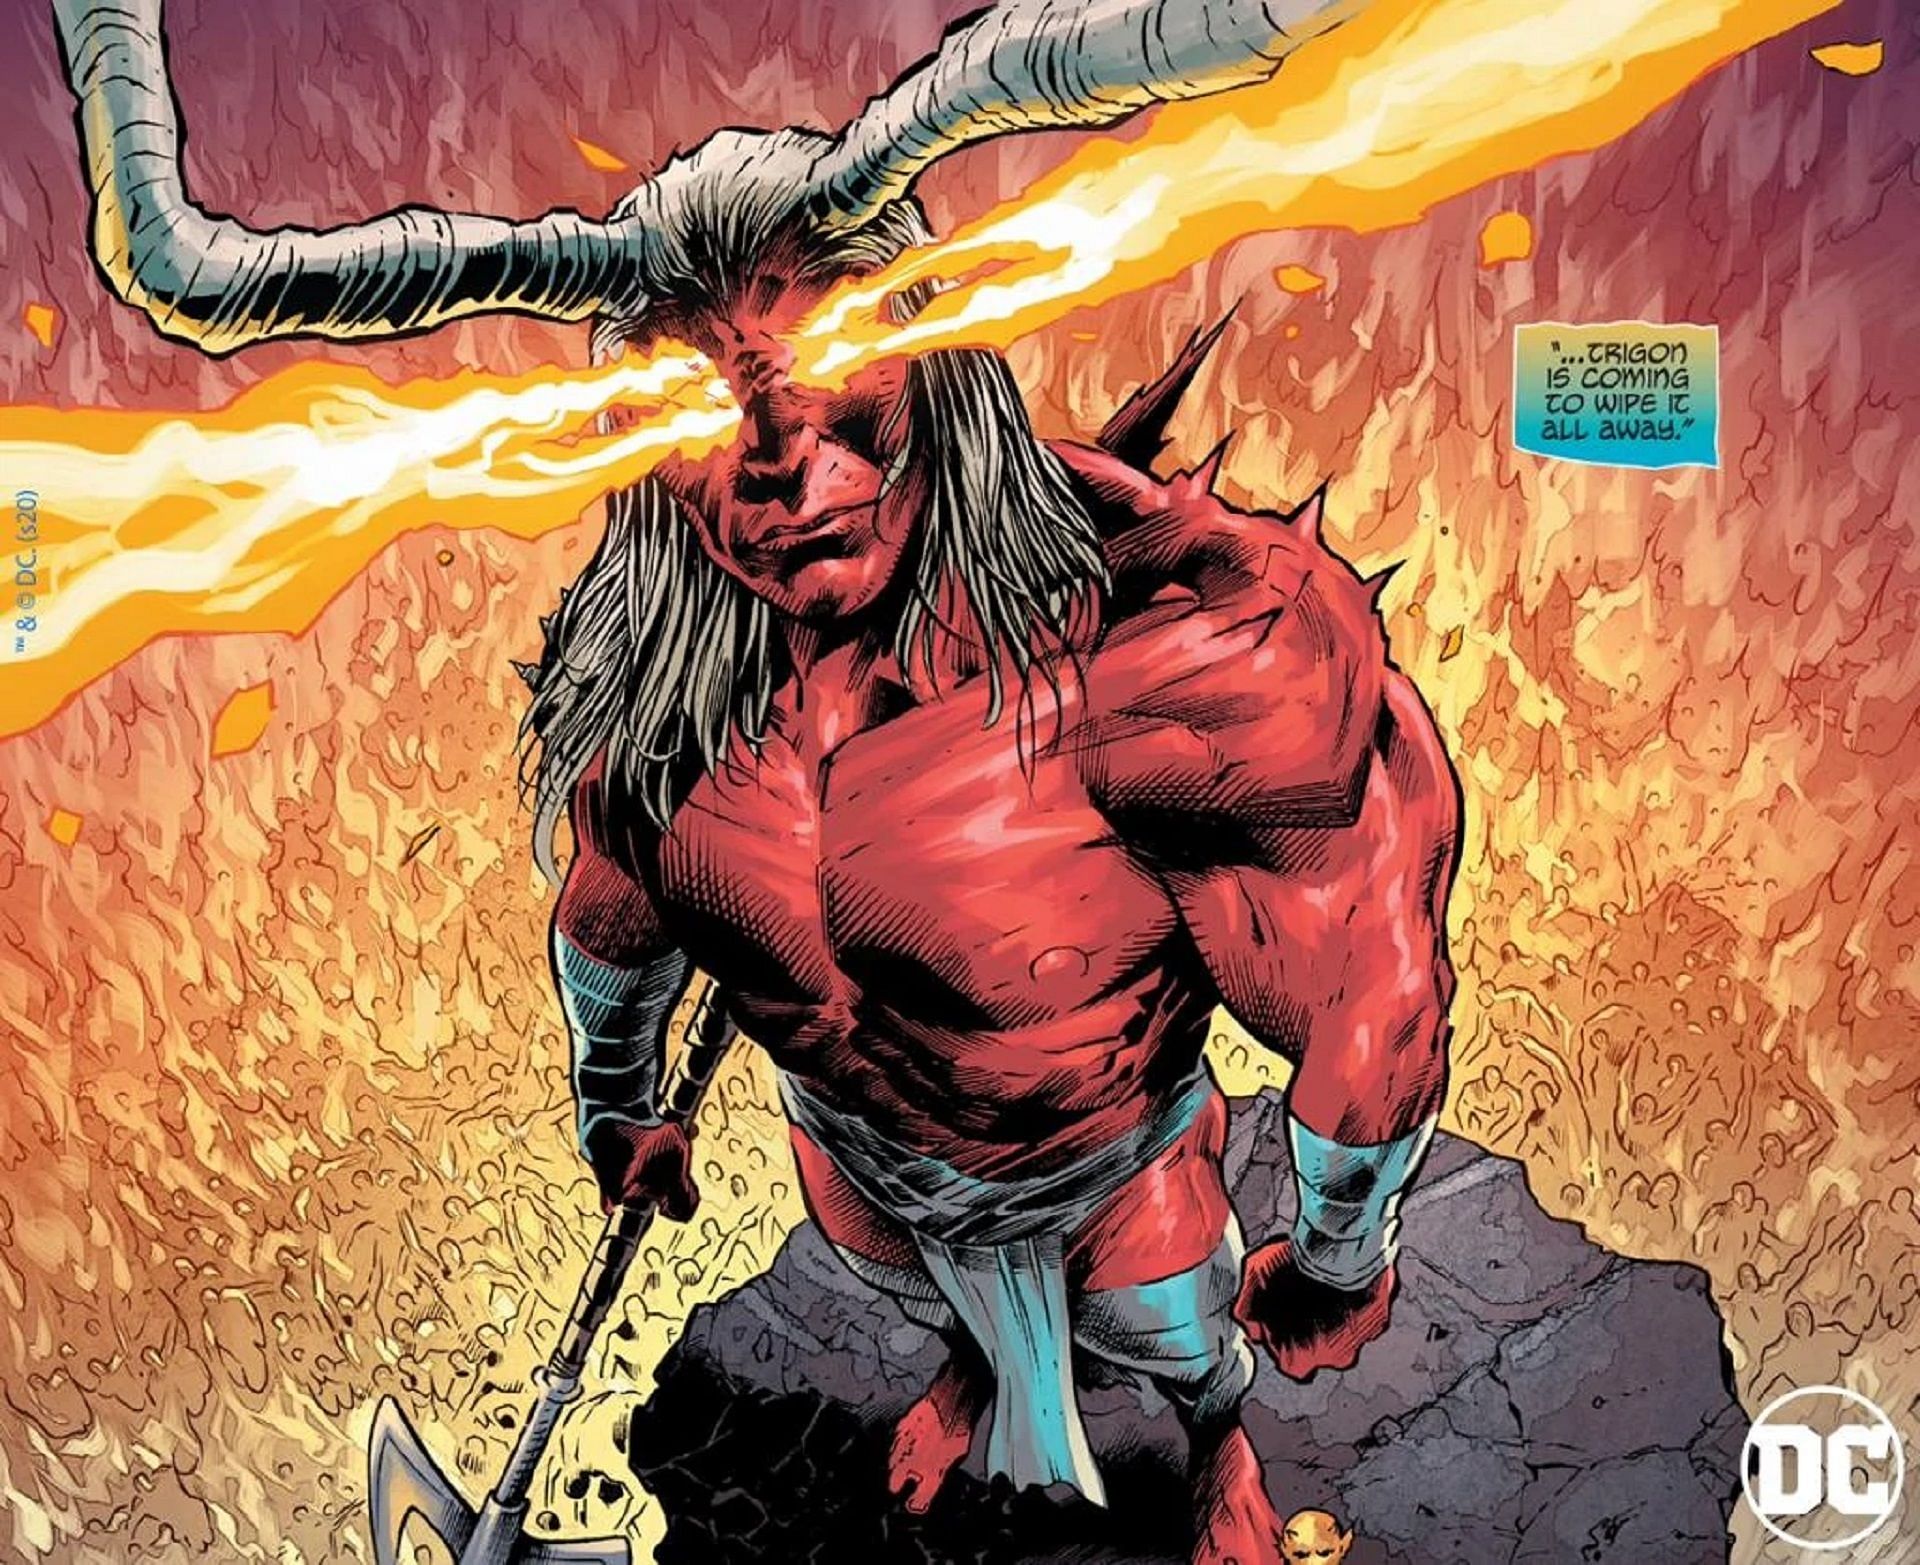 Trigon first appeared in New Teen Titans #2 (Image via DC)